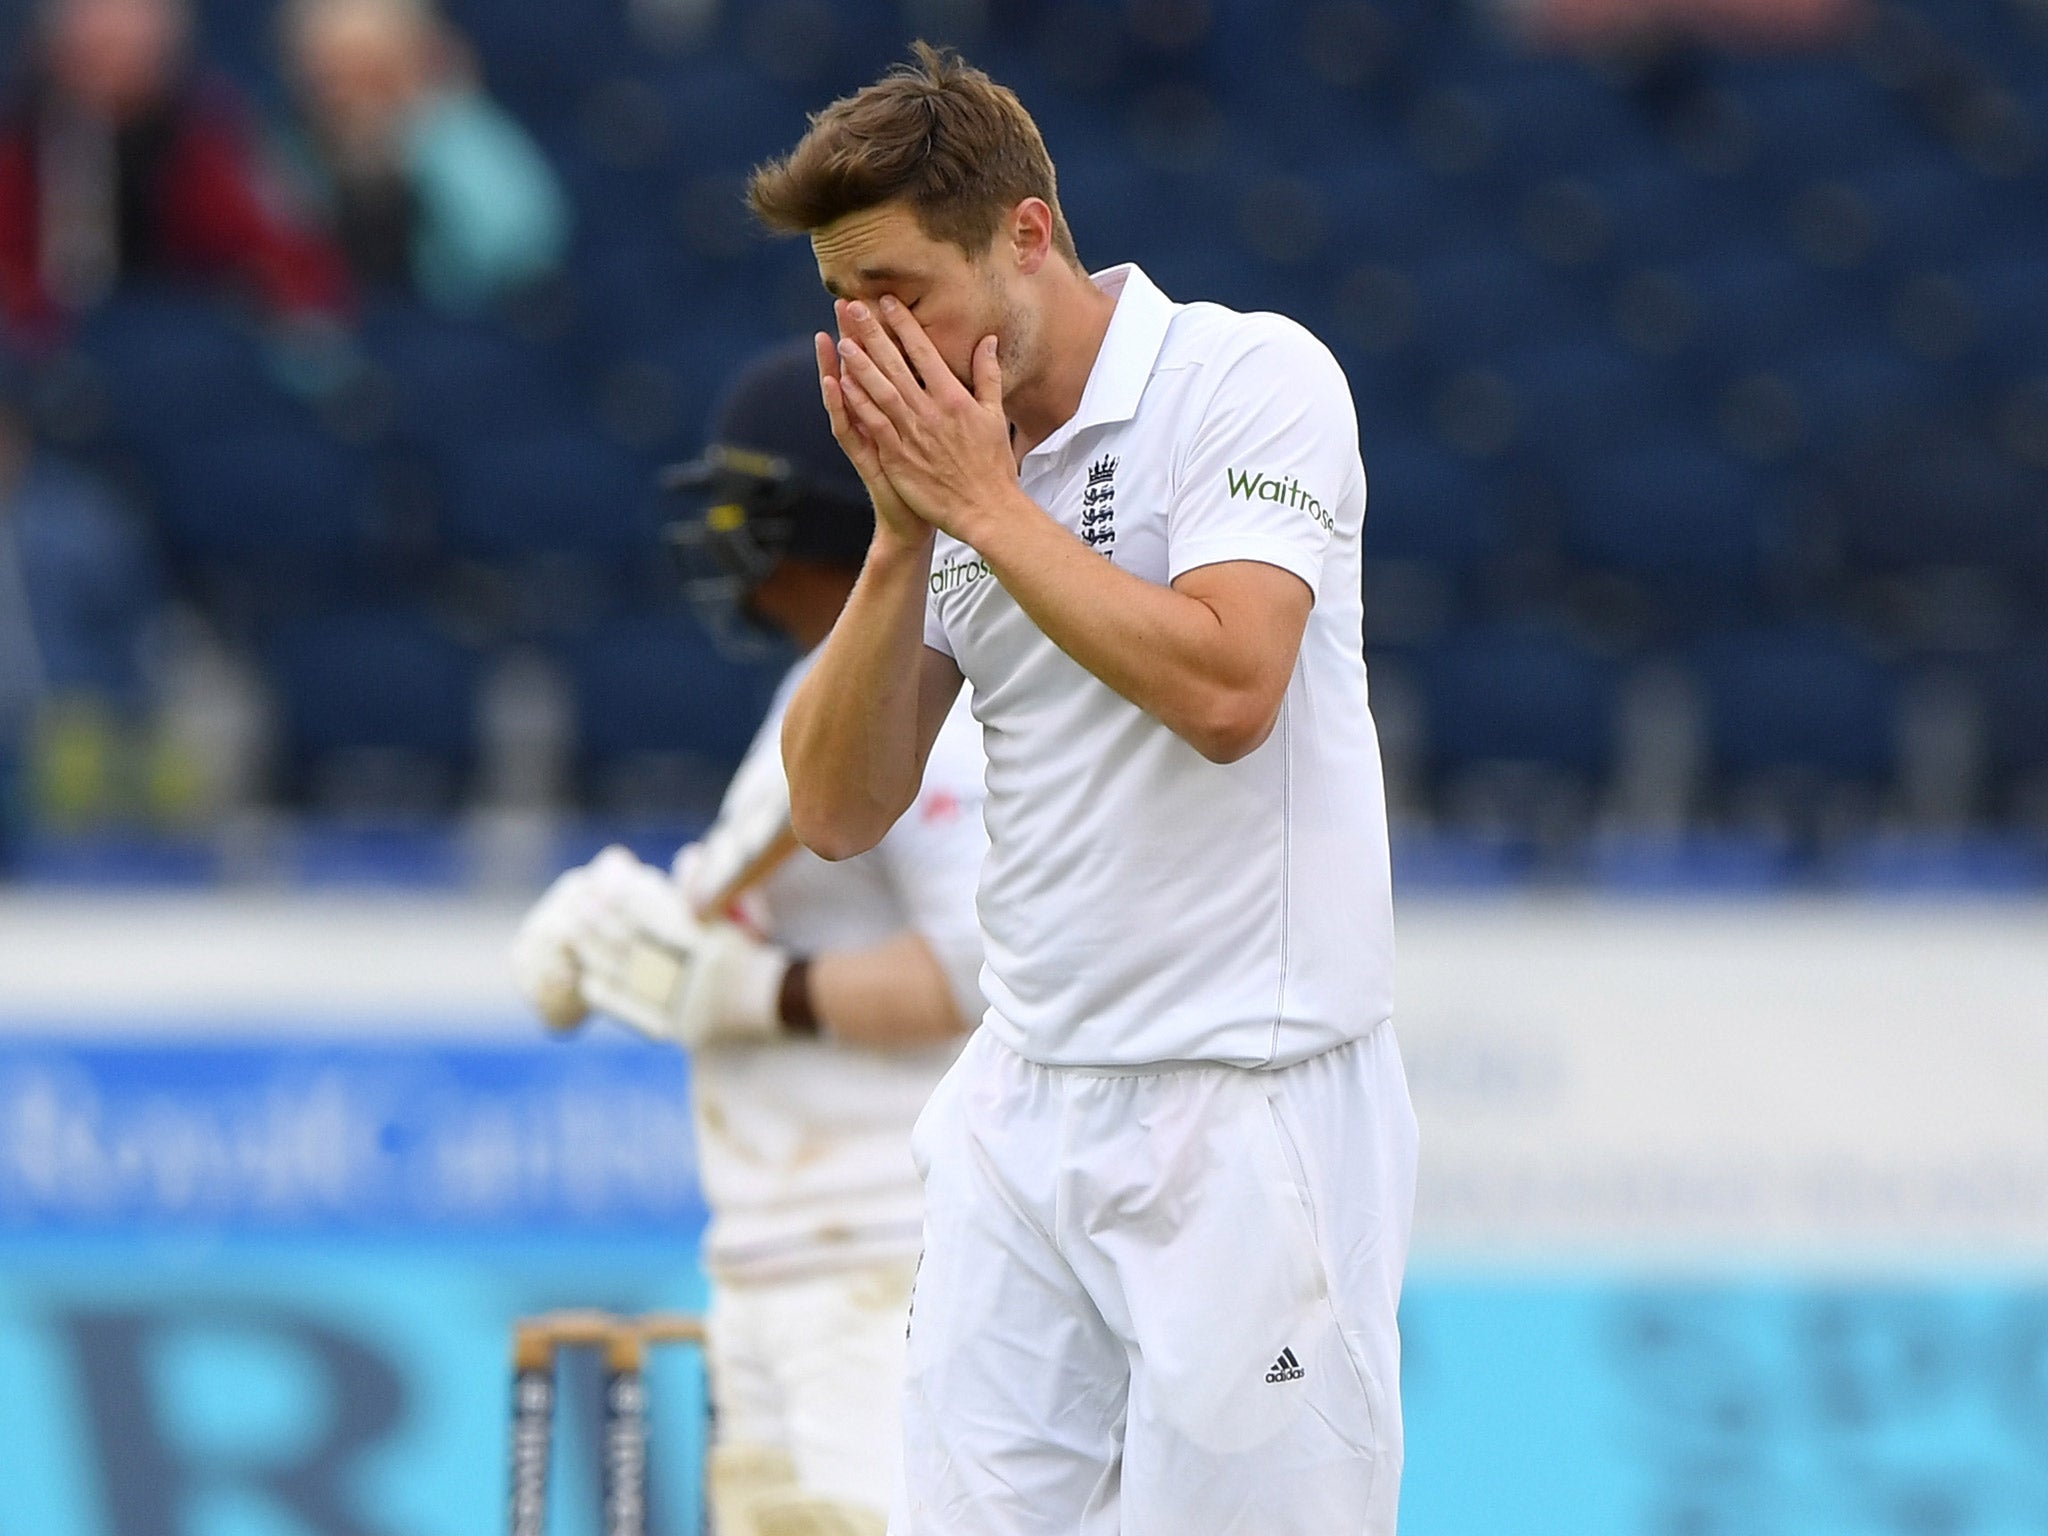 Chris Woakes was unlucky with ball in hand for England